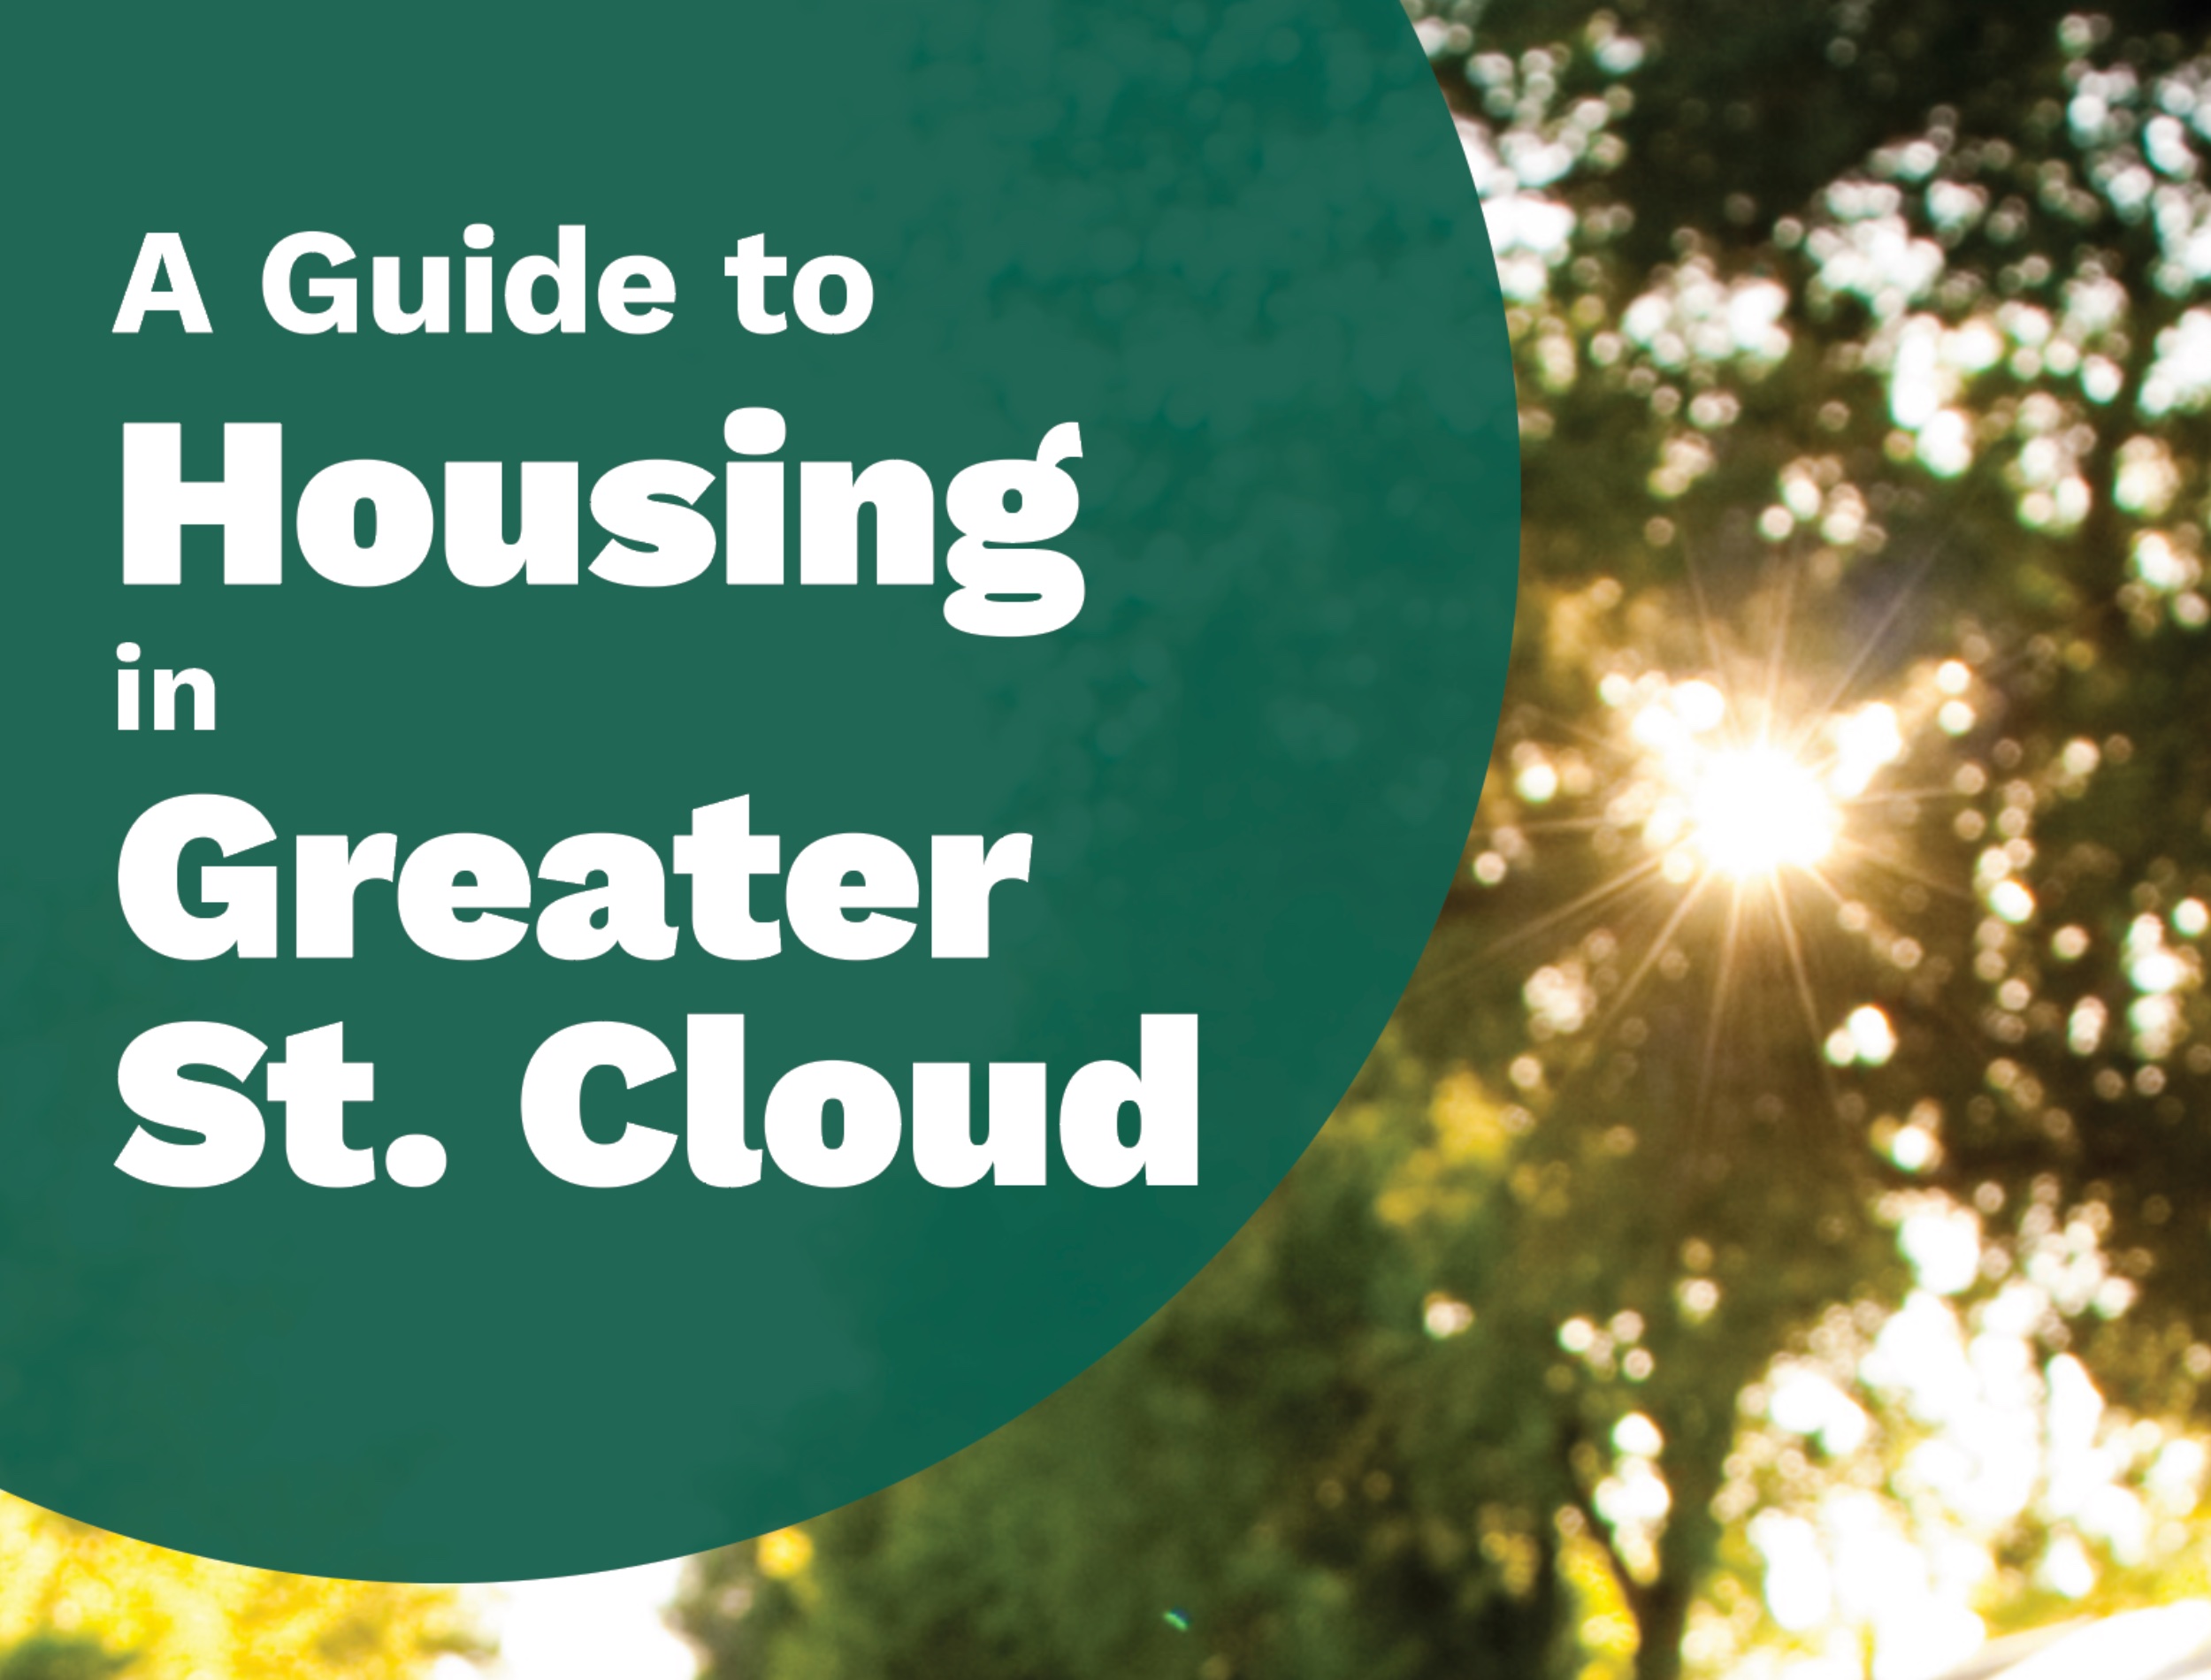 Guide to Housing in Greater St. Cloud